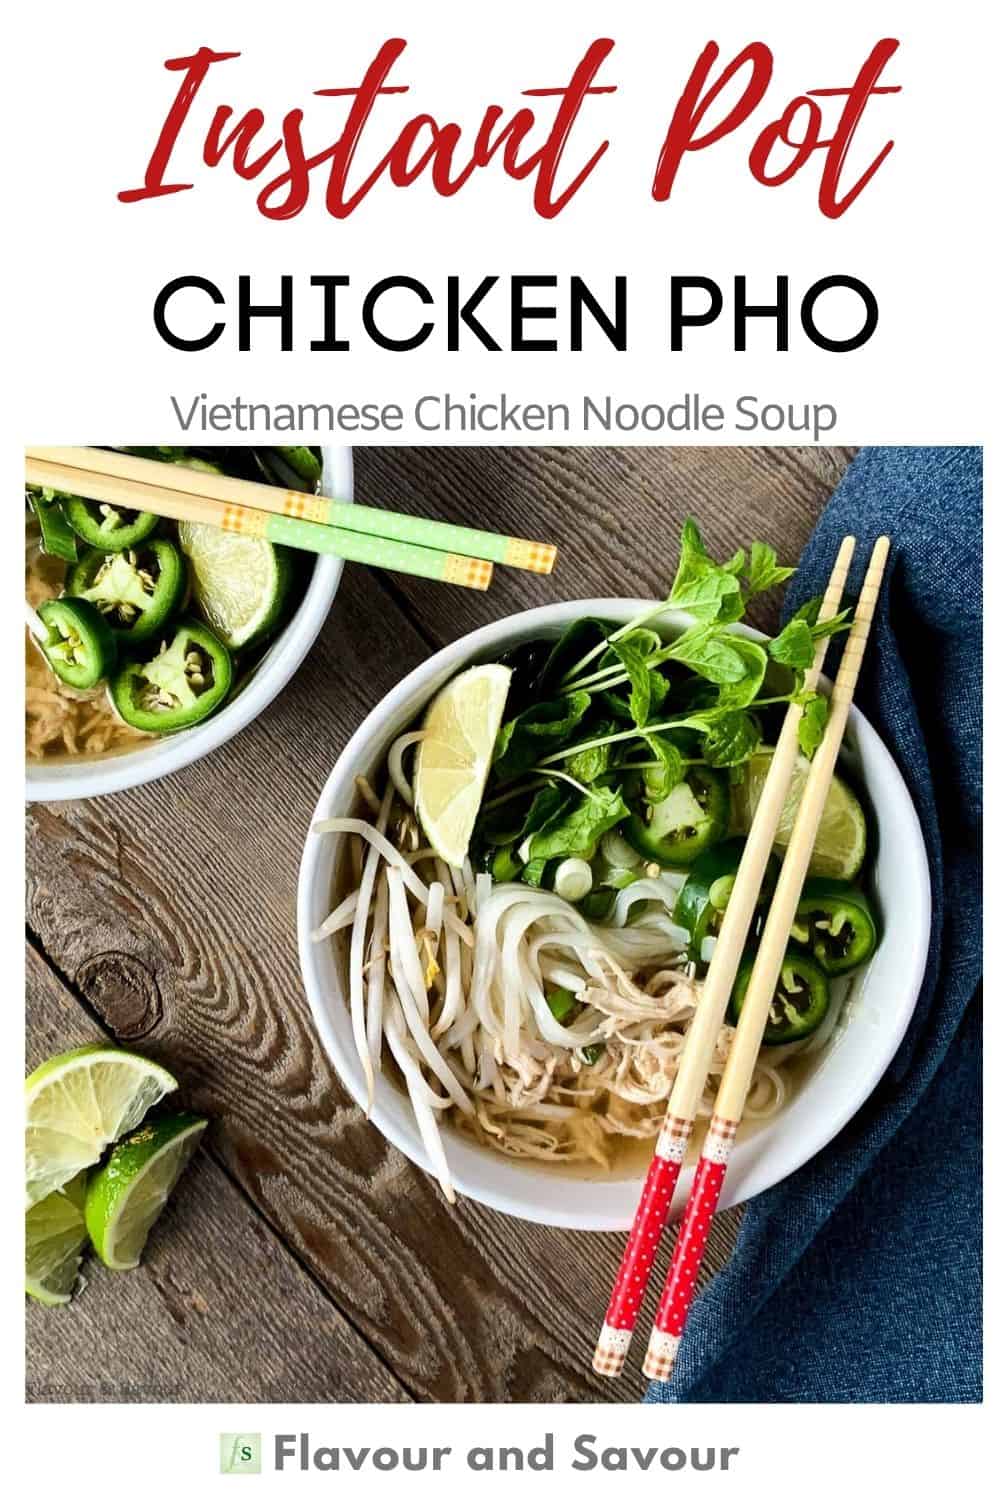 Instant Pot Chicken Pho (Pho Ga) - Flavour and Savour